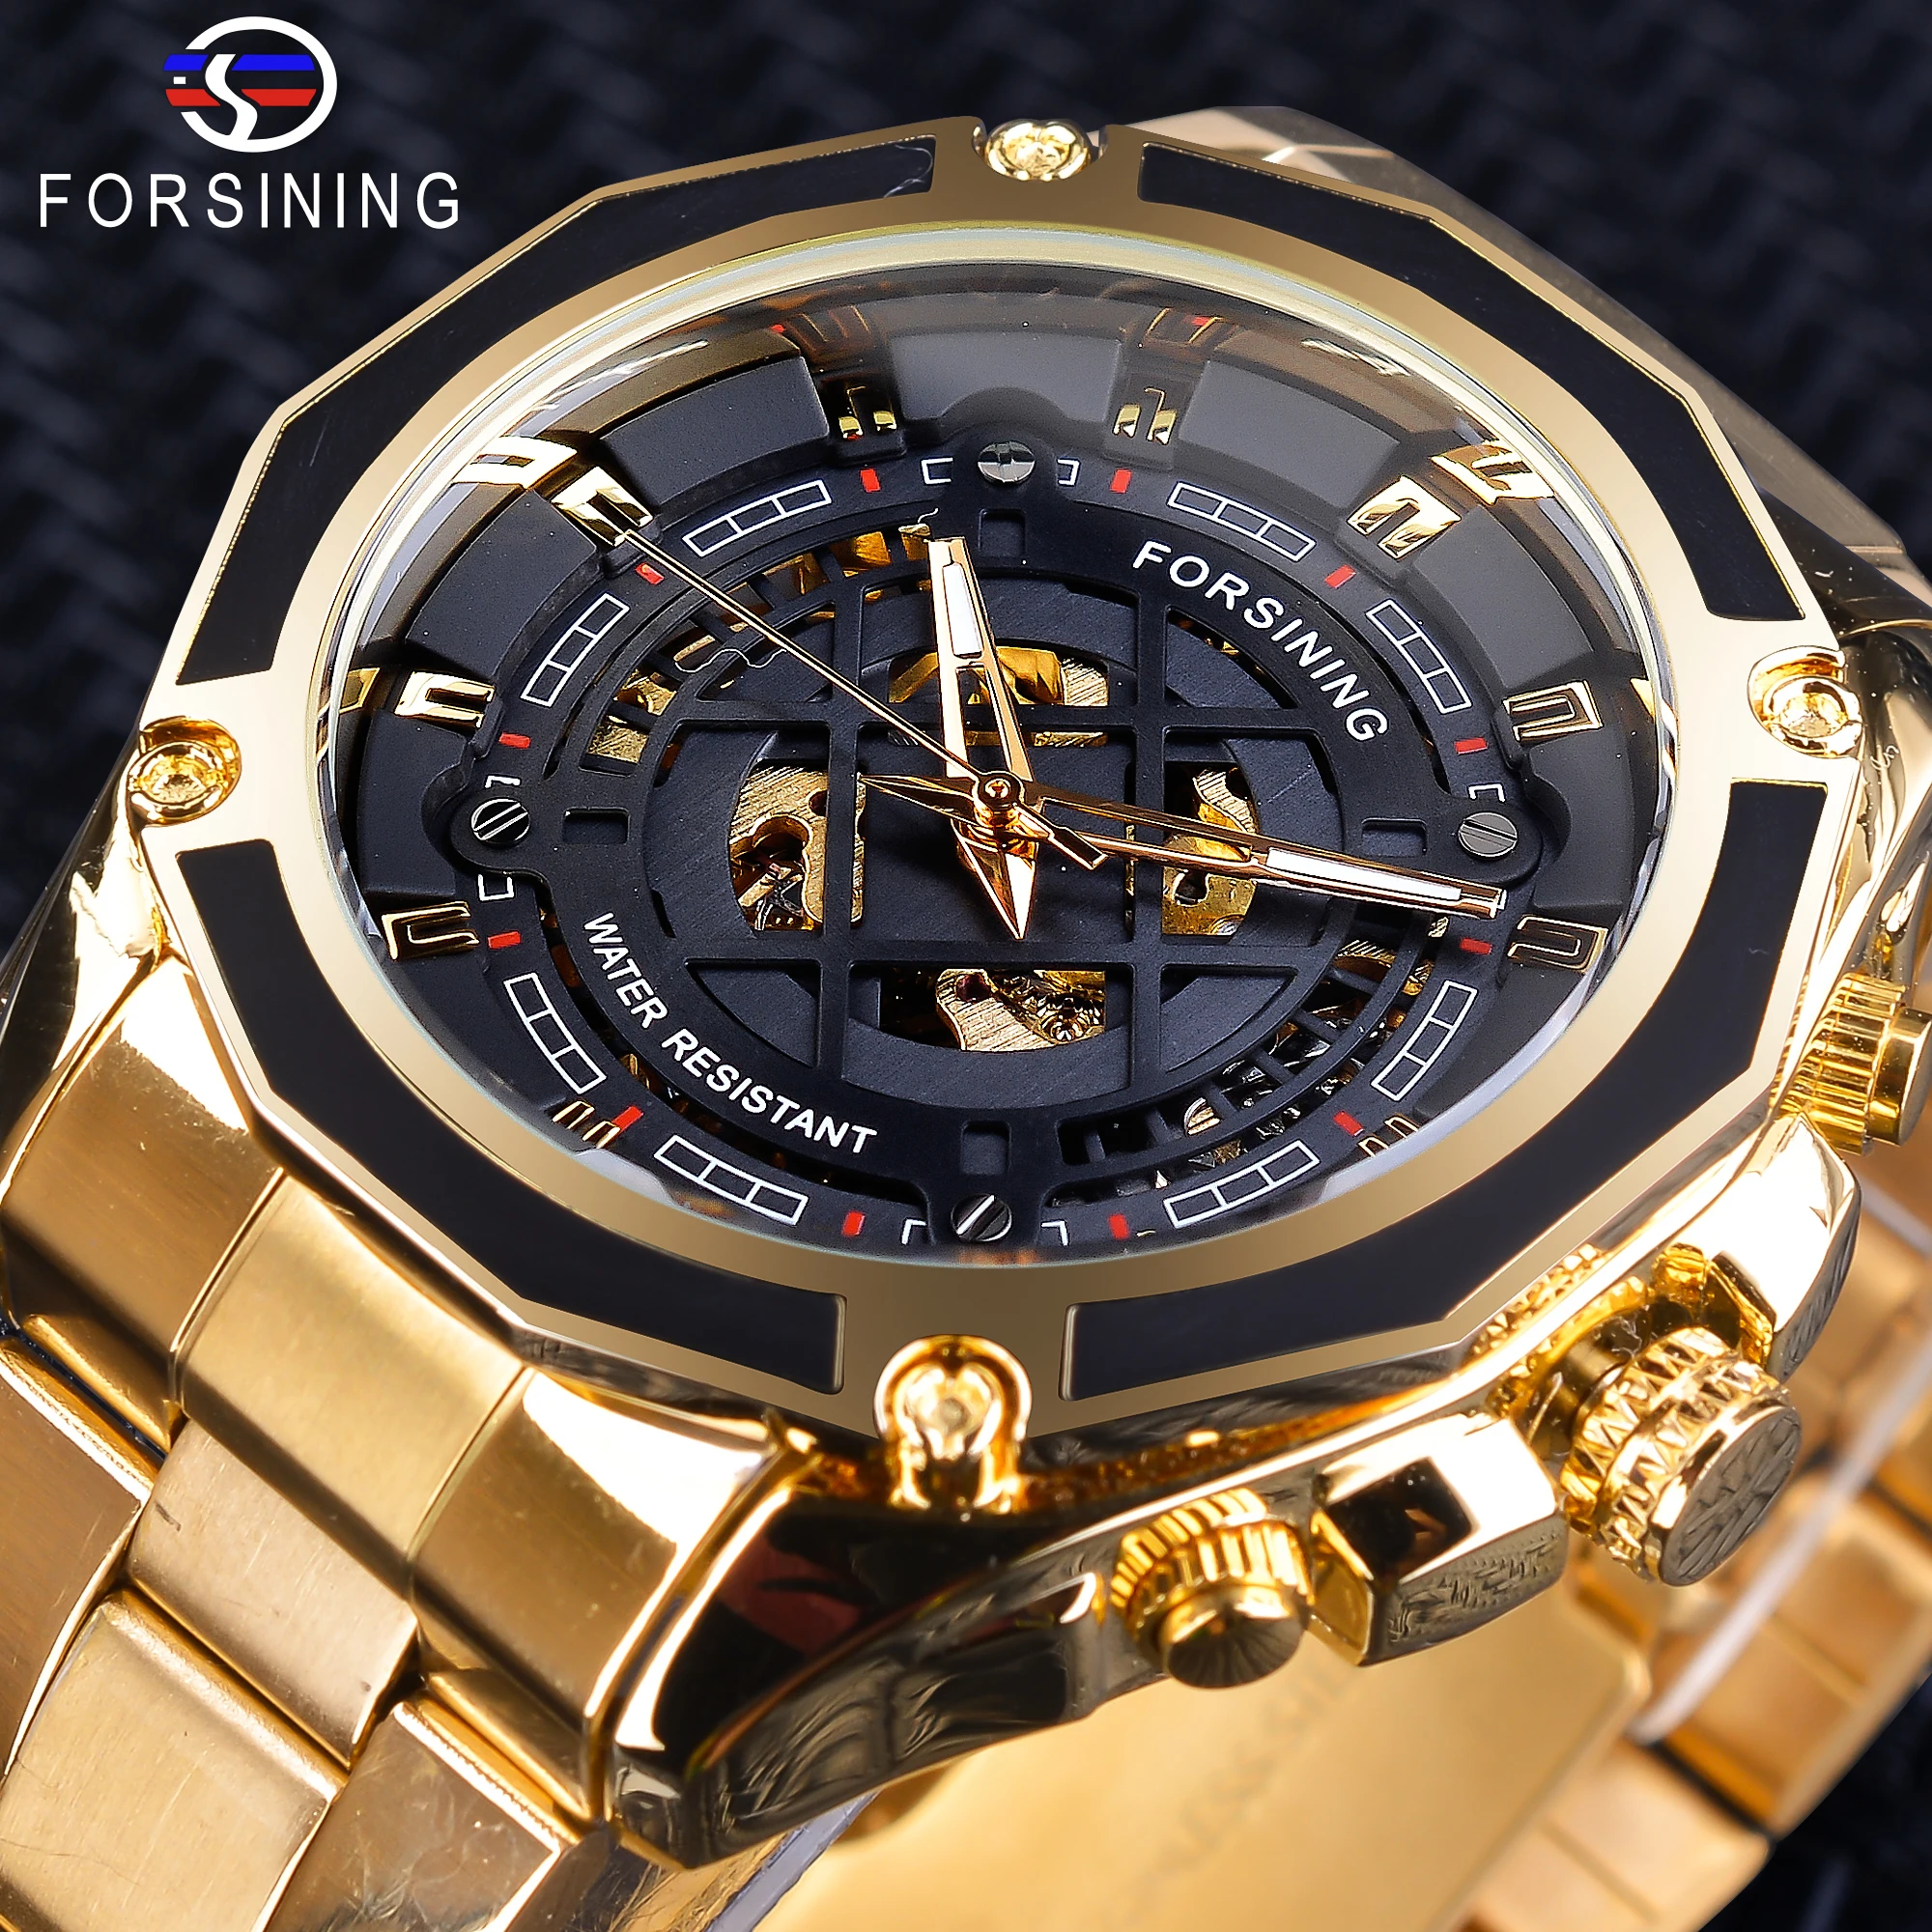 Forsining 3D Transparent Design Gold Stainless Steel Men's Automatic Watch Top Brand Luxury Male Skeleton Clock Montre Homme